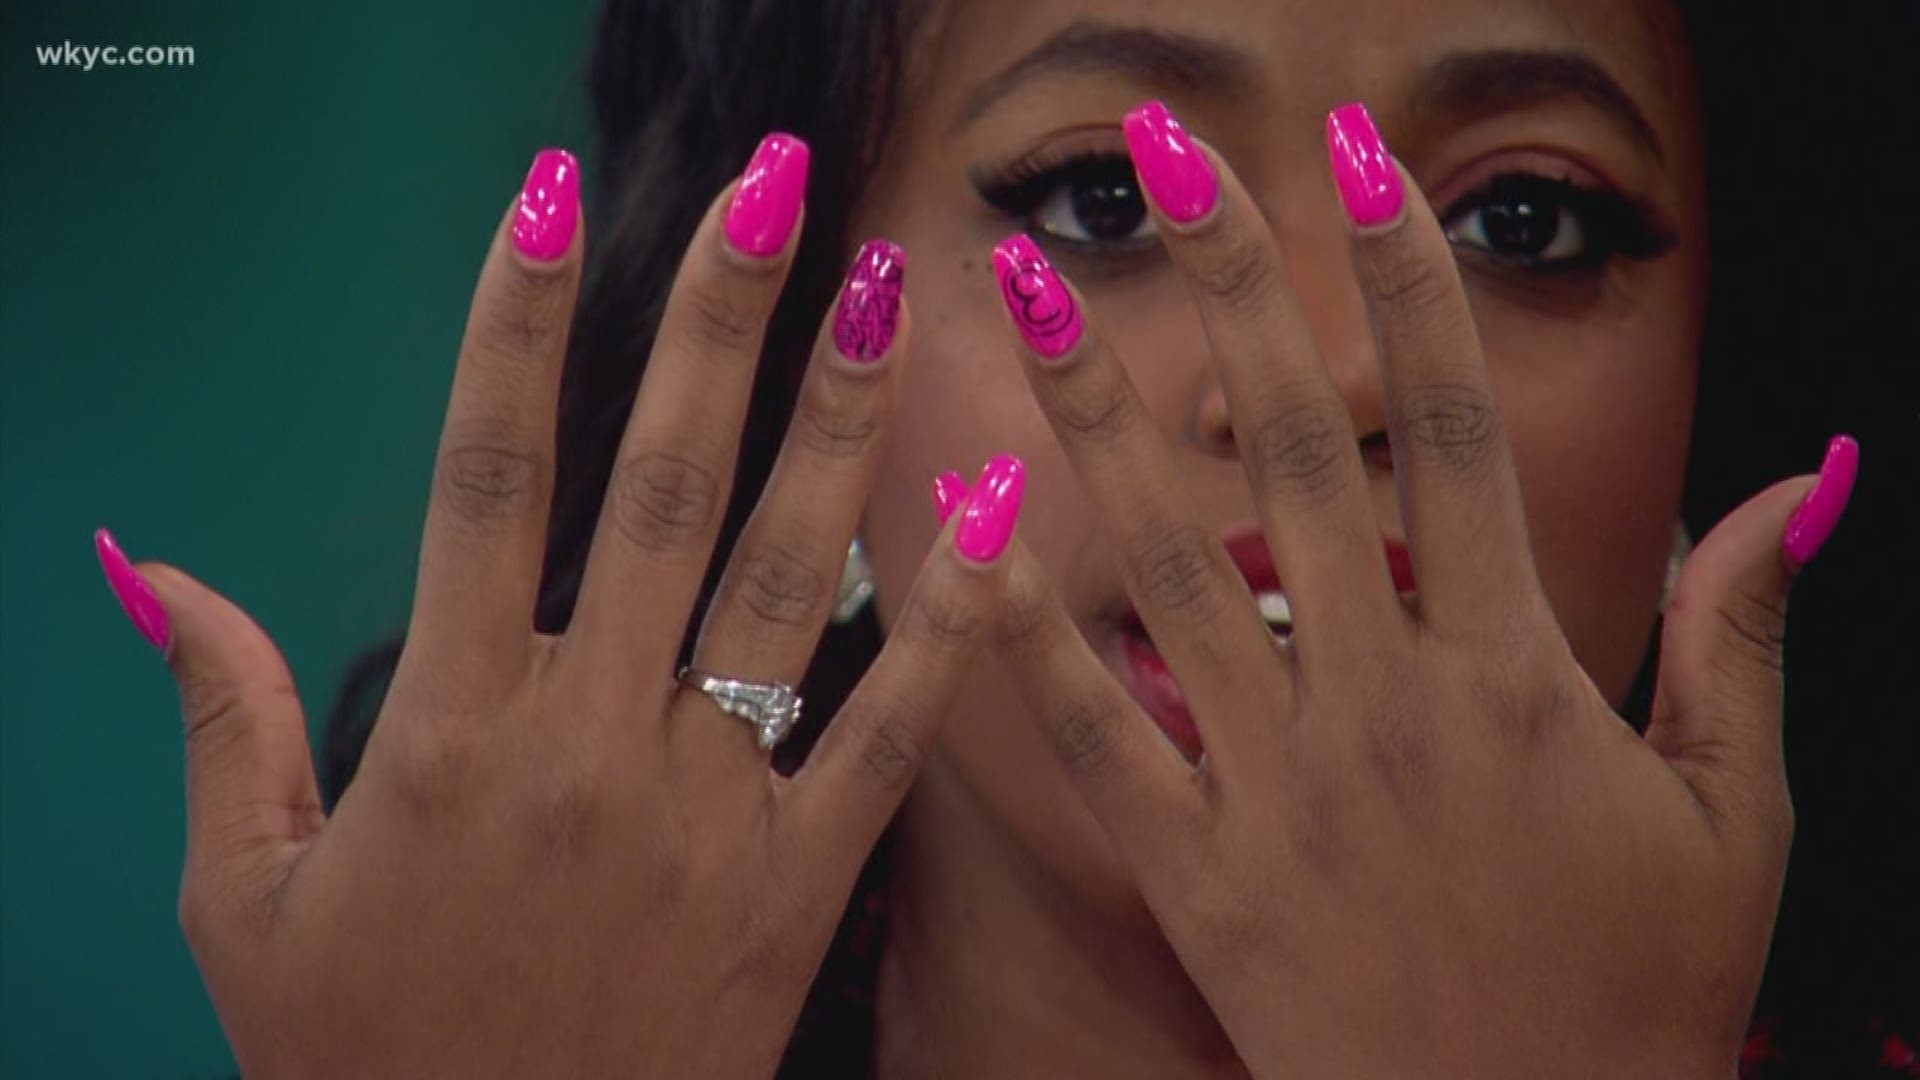 Feb. 7, 2020: When it comes to getting a good manicure it’s all about the nail technician. One Cleveland woman decided that press-on nails is the way to go.